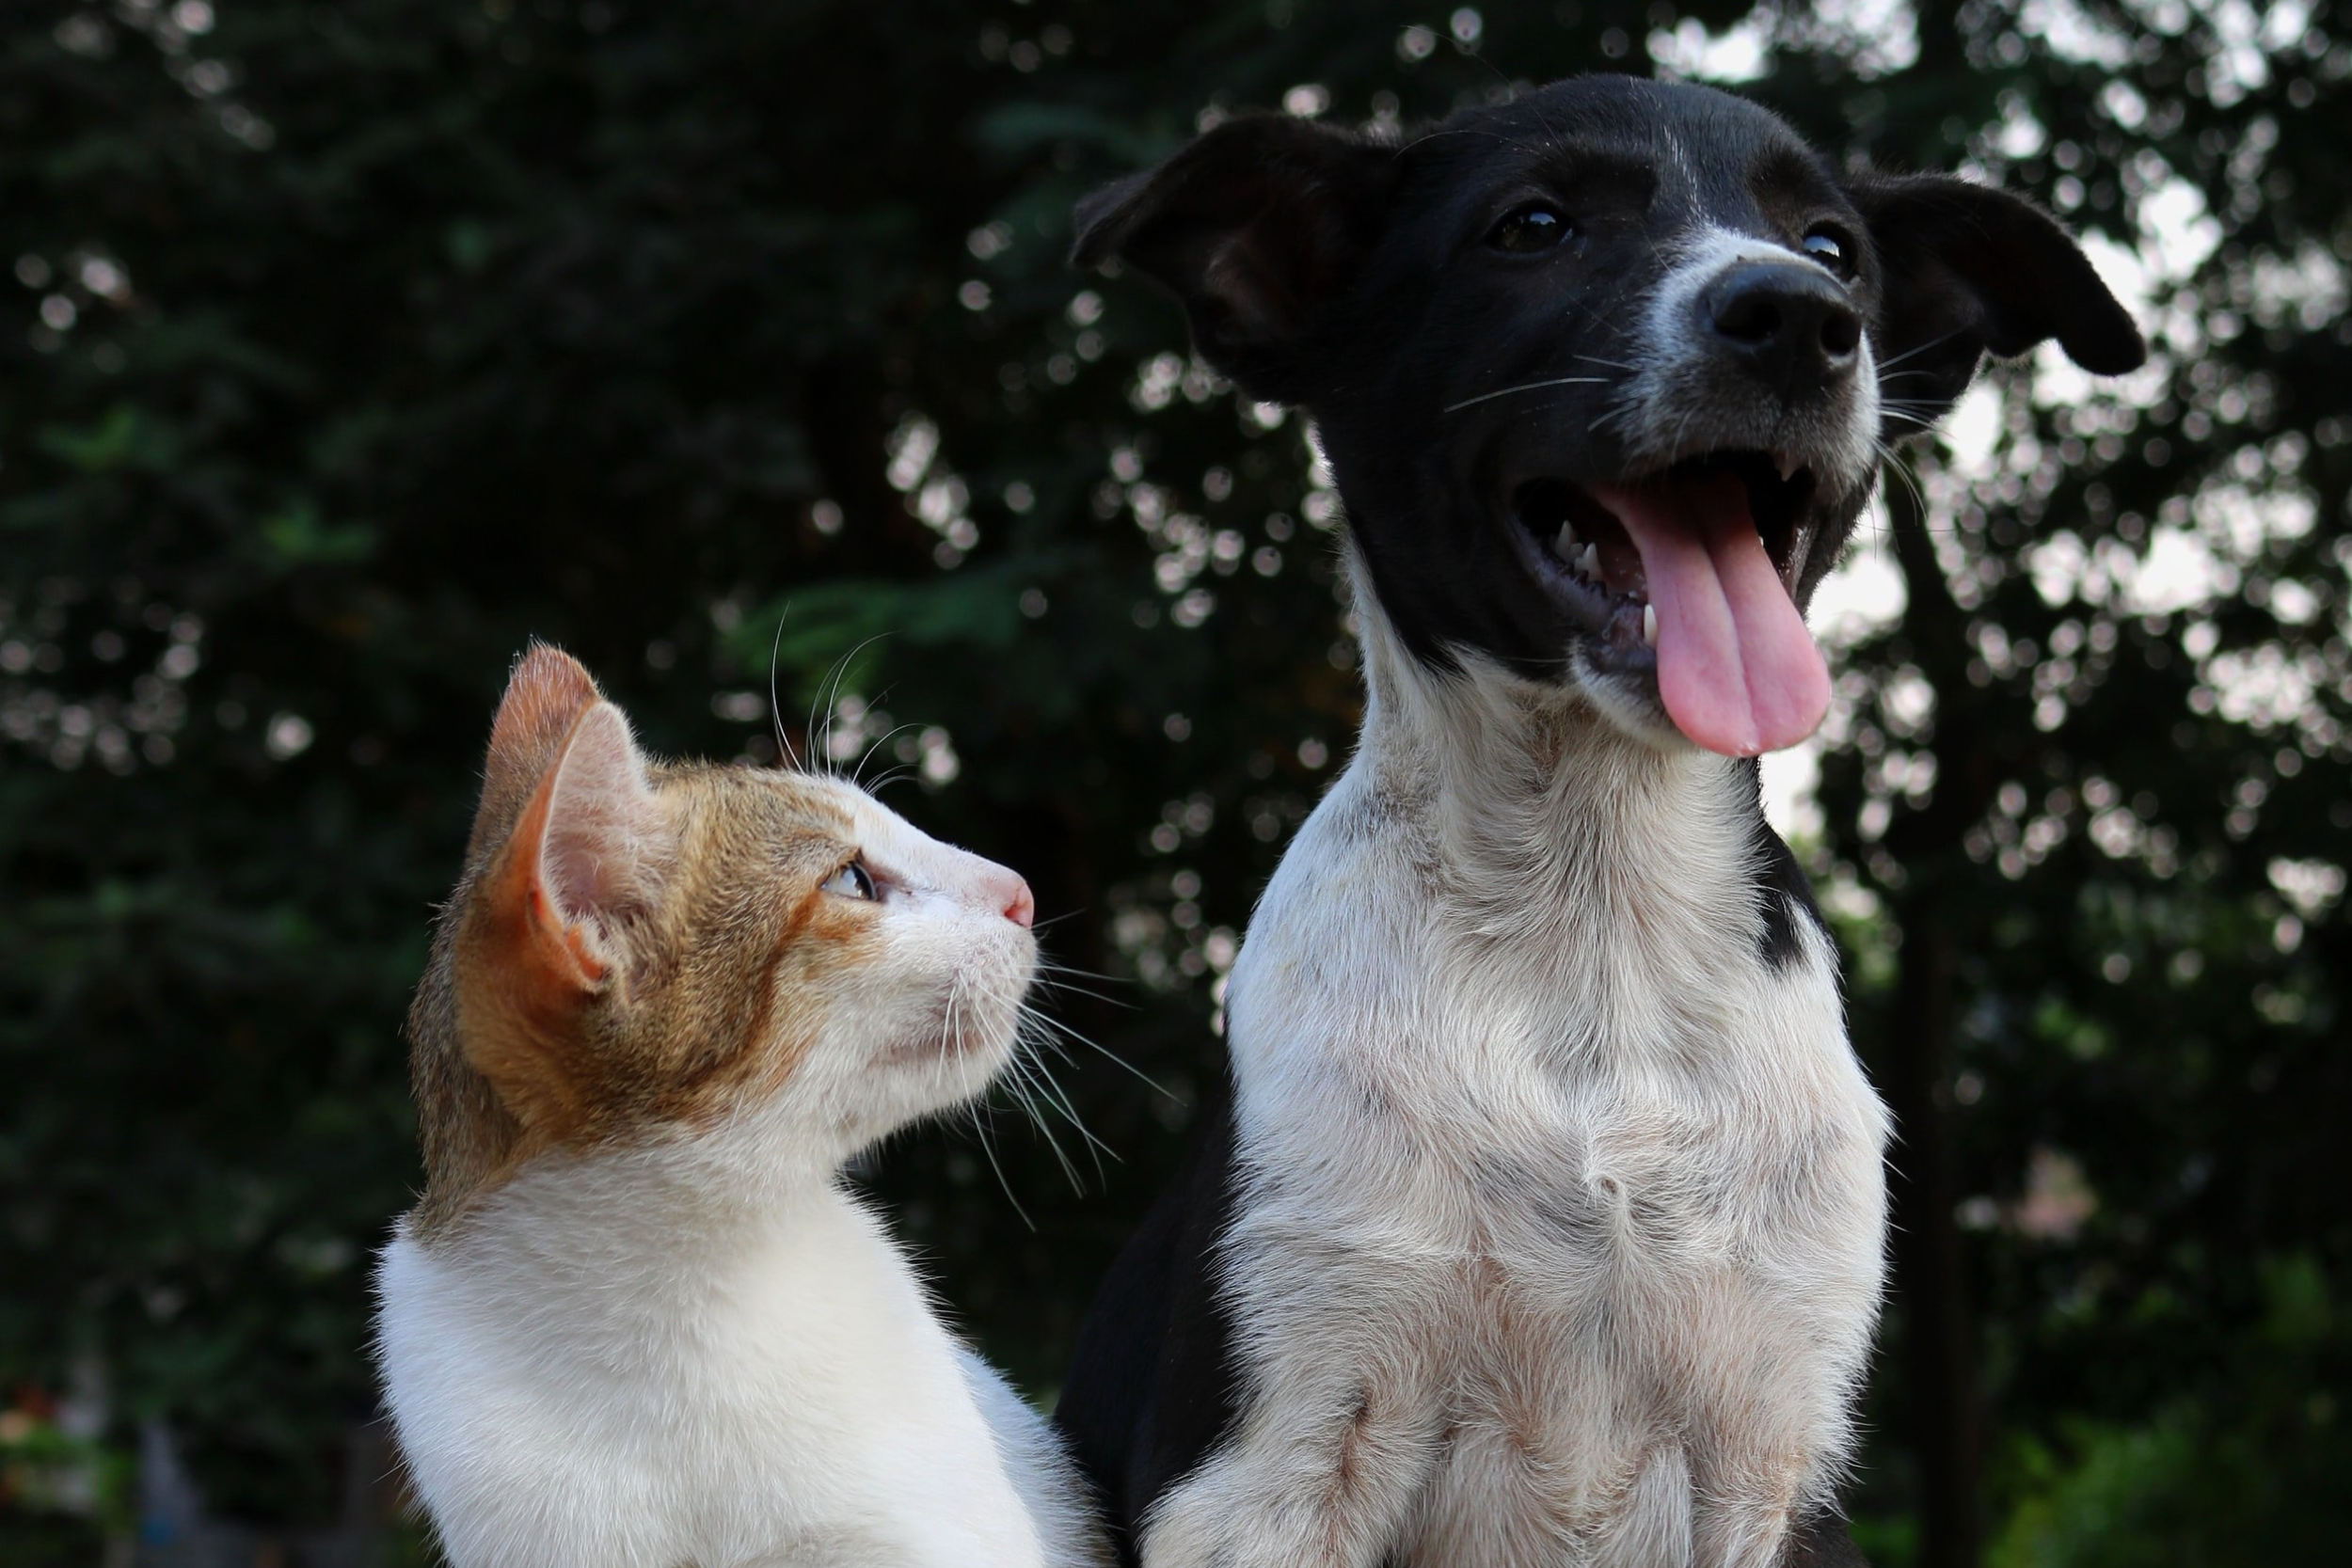 A dog and cat standing together